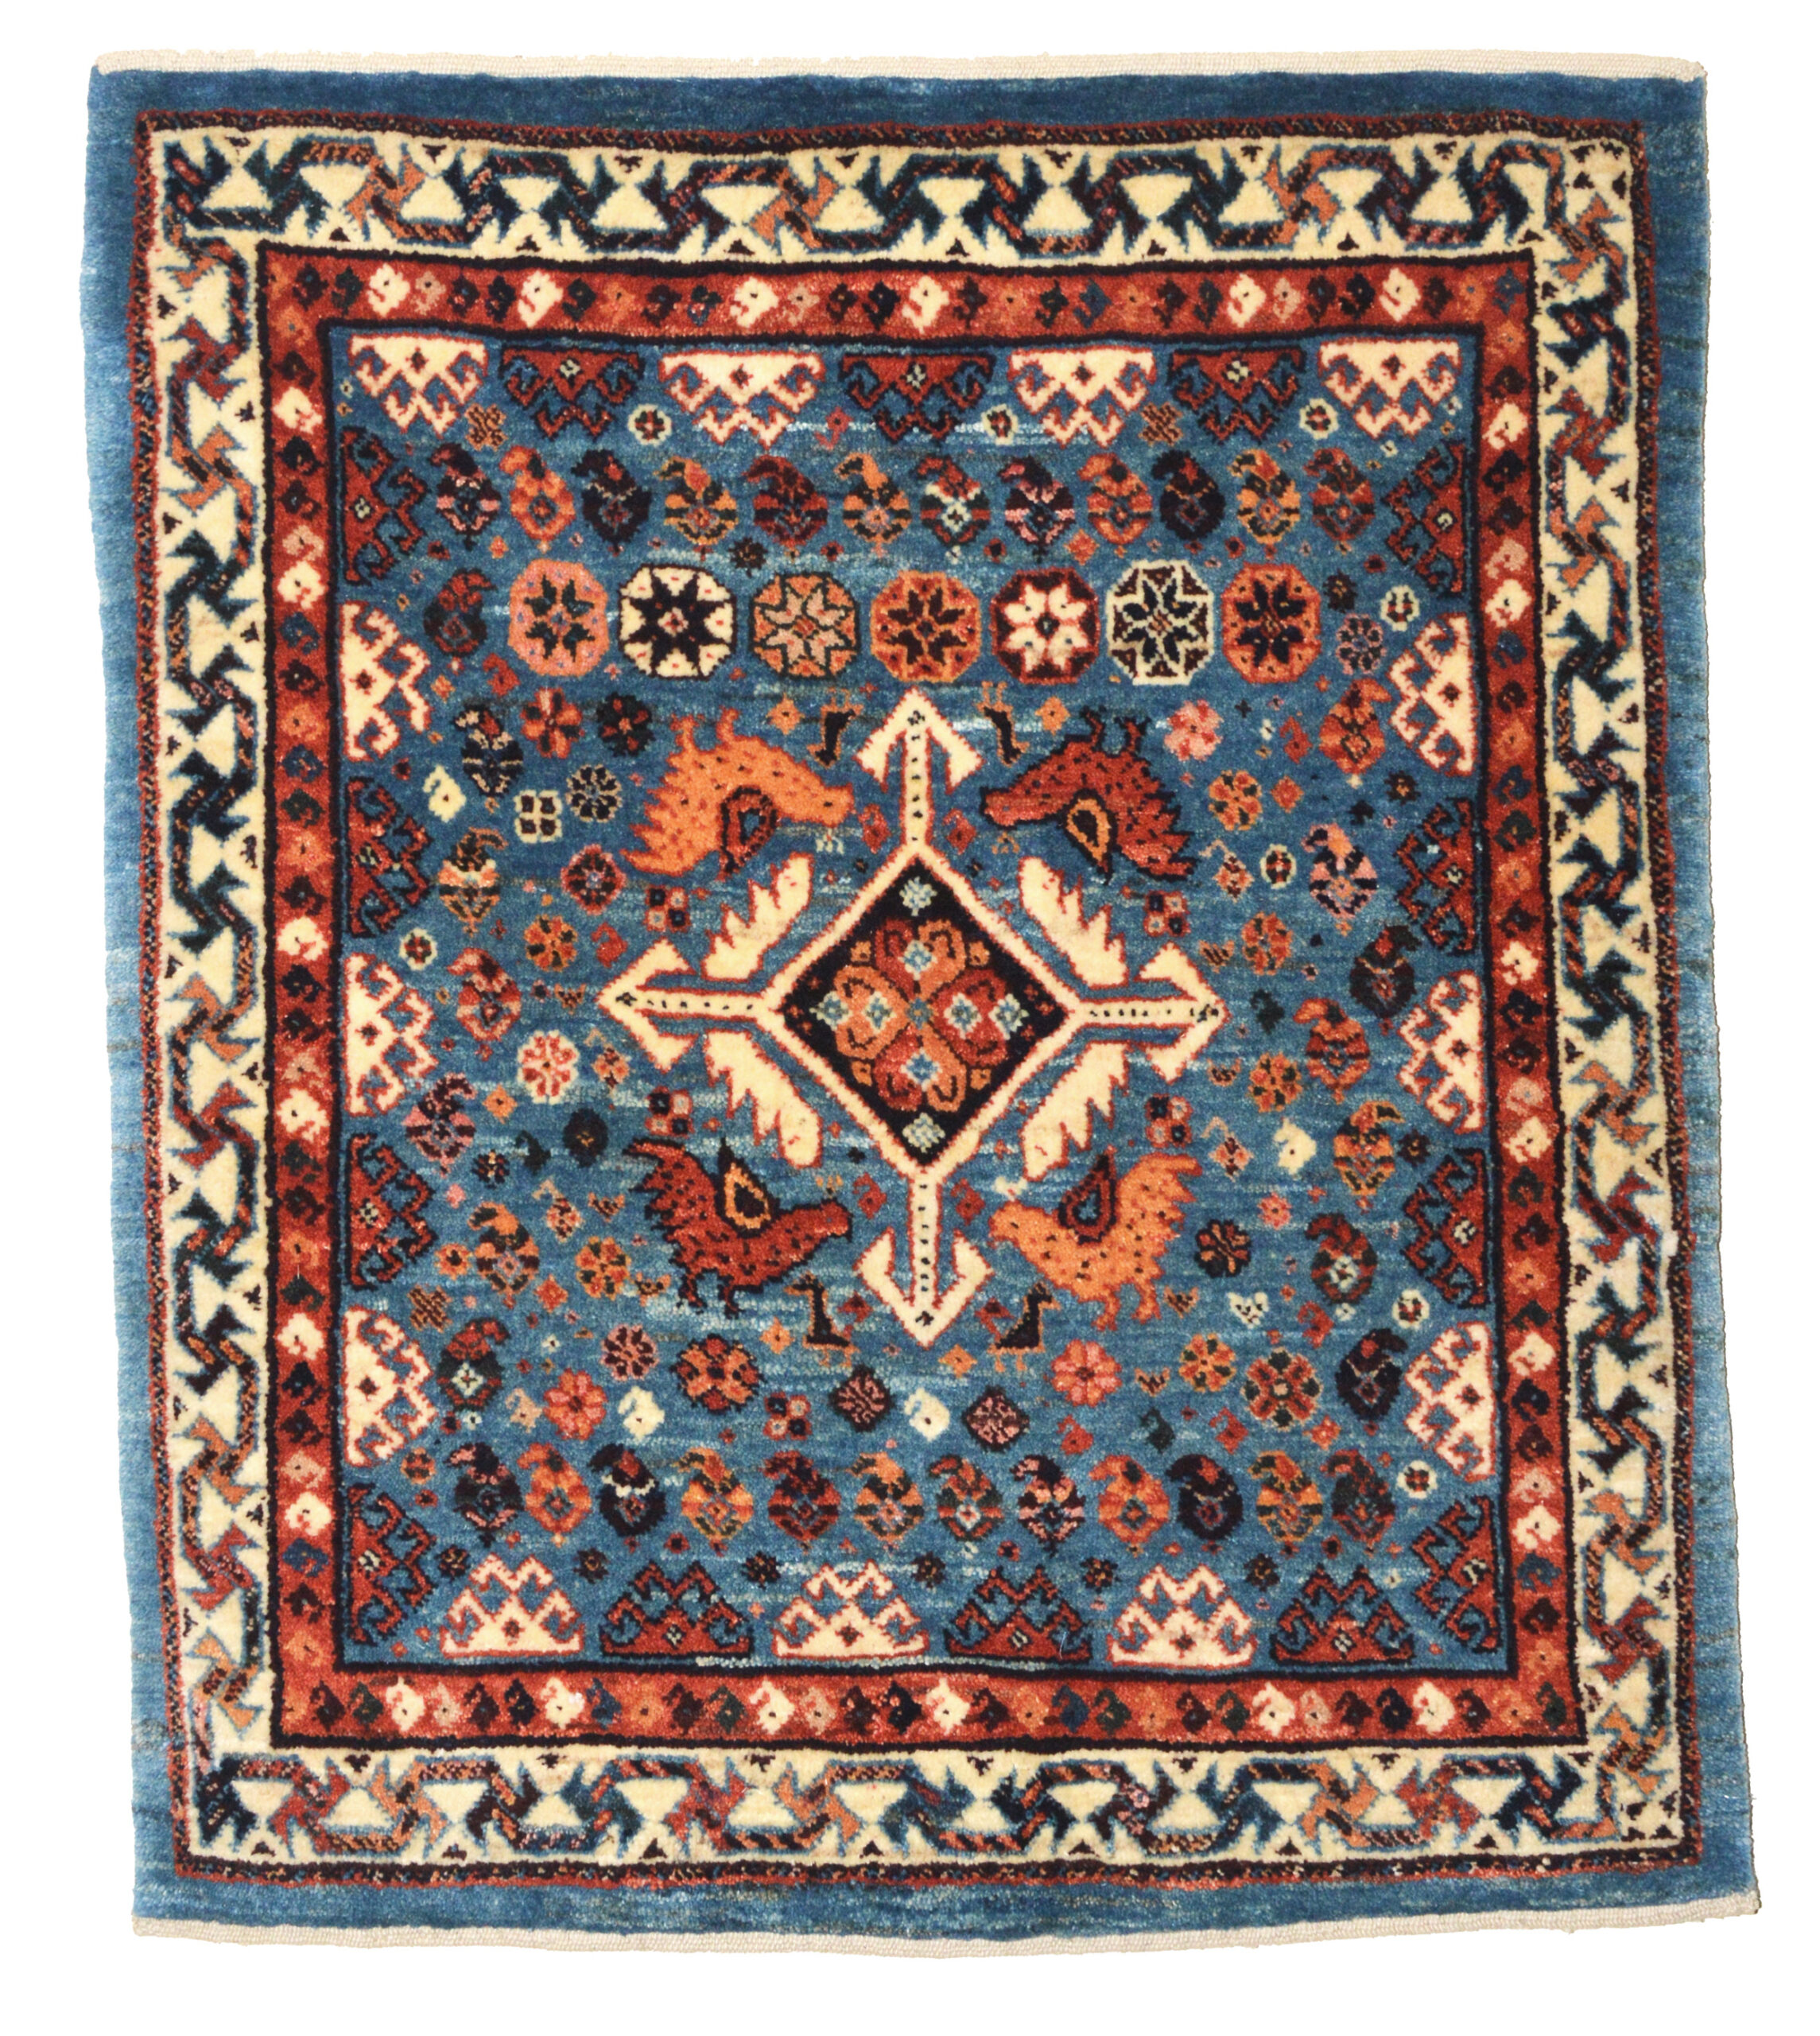 A new QashQa'i rug, hand woven utilizing natural dyes. The deep sky blue field is decorated with stylized birds, small animals, geometric motifs and Boteh (Paisley shaped motifs). Douglas Stock Gallery, new Oriental rugs Boston,MA area, Oriental rugs New England, Oriental rugs New York by appointment